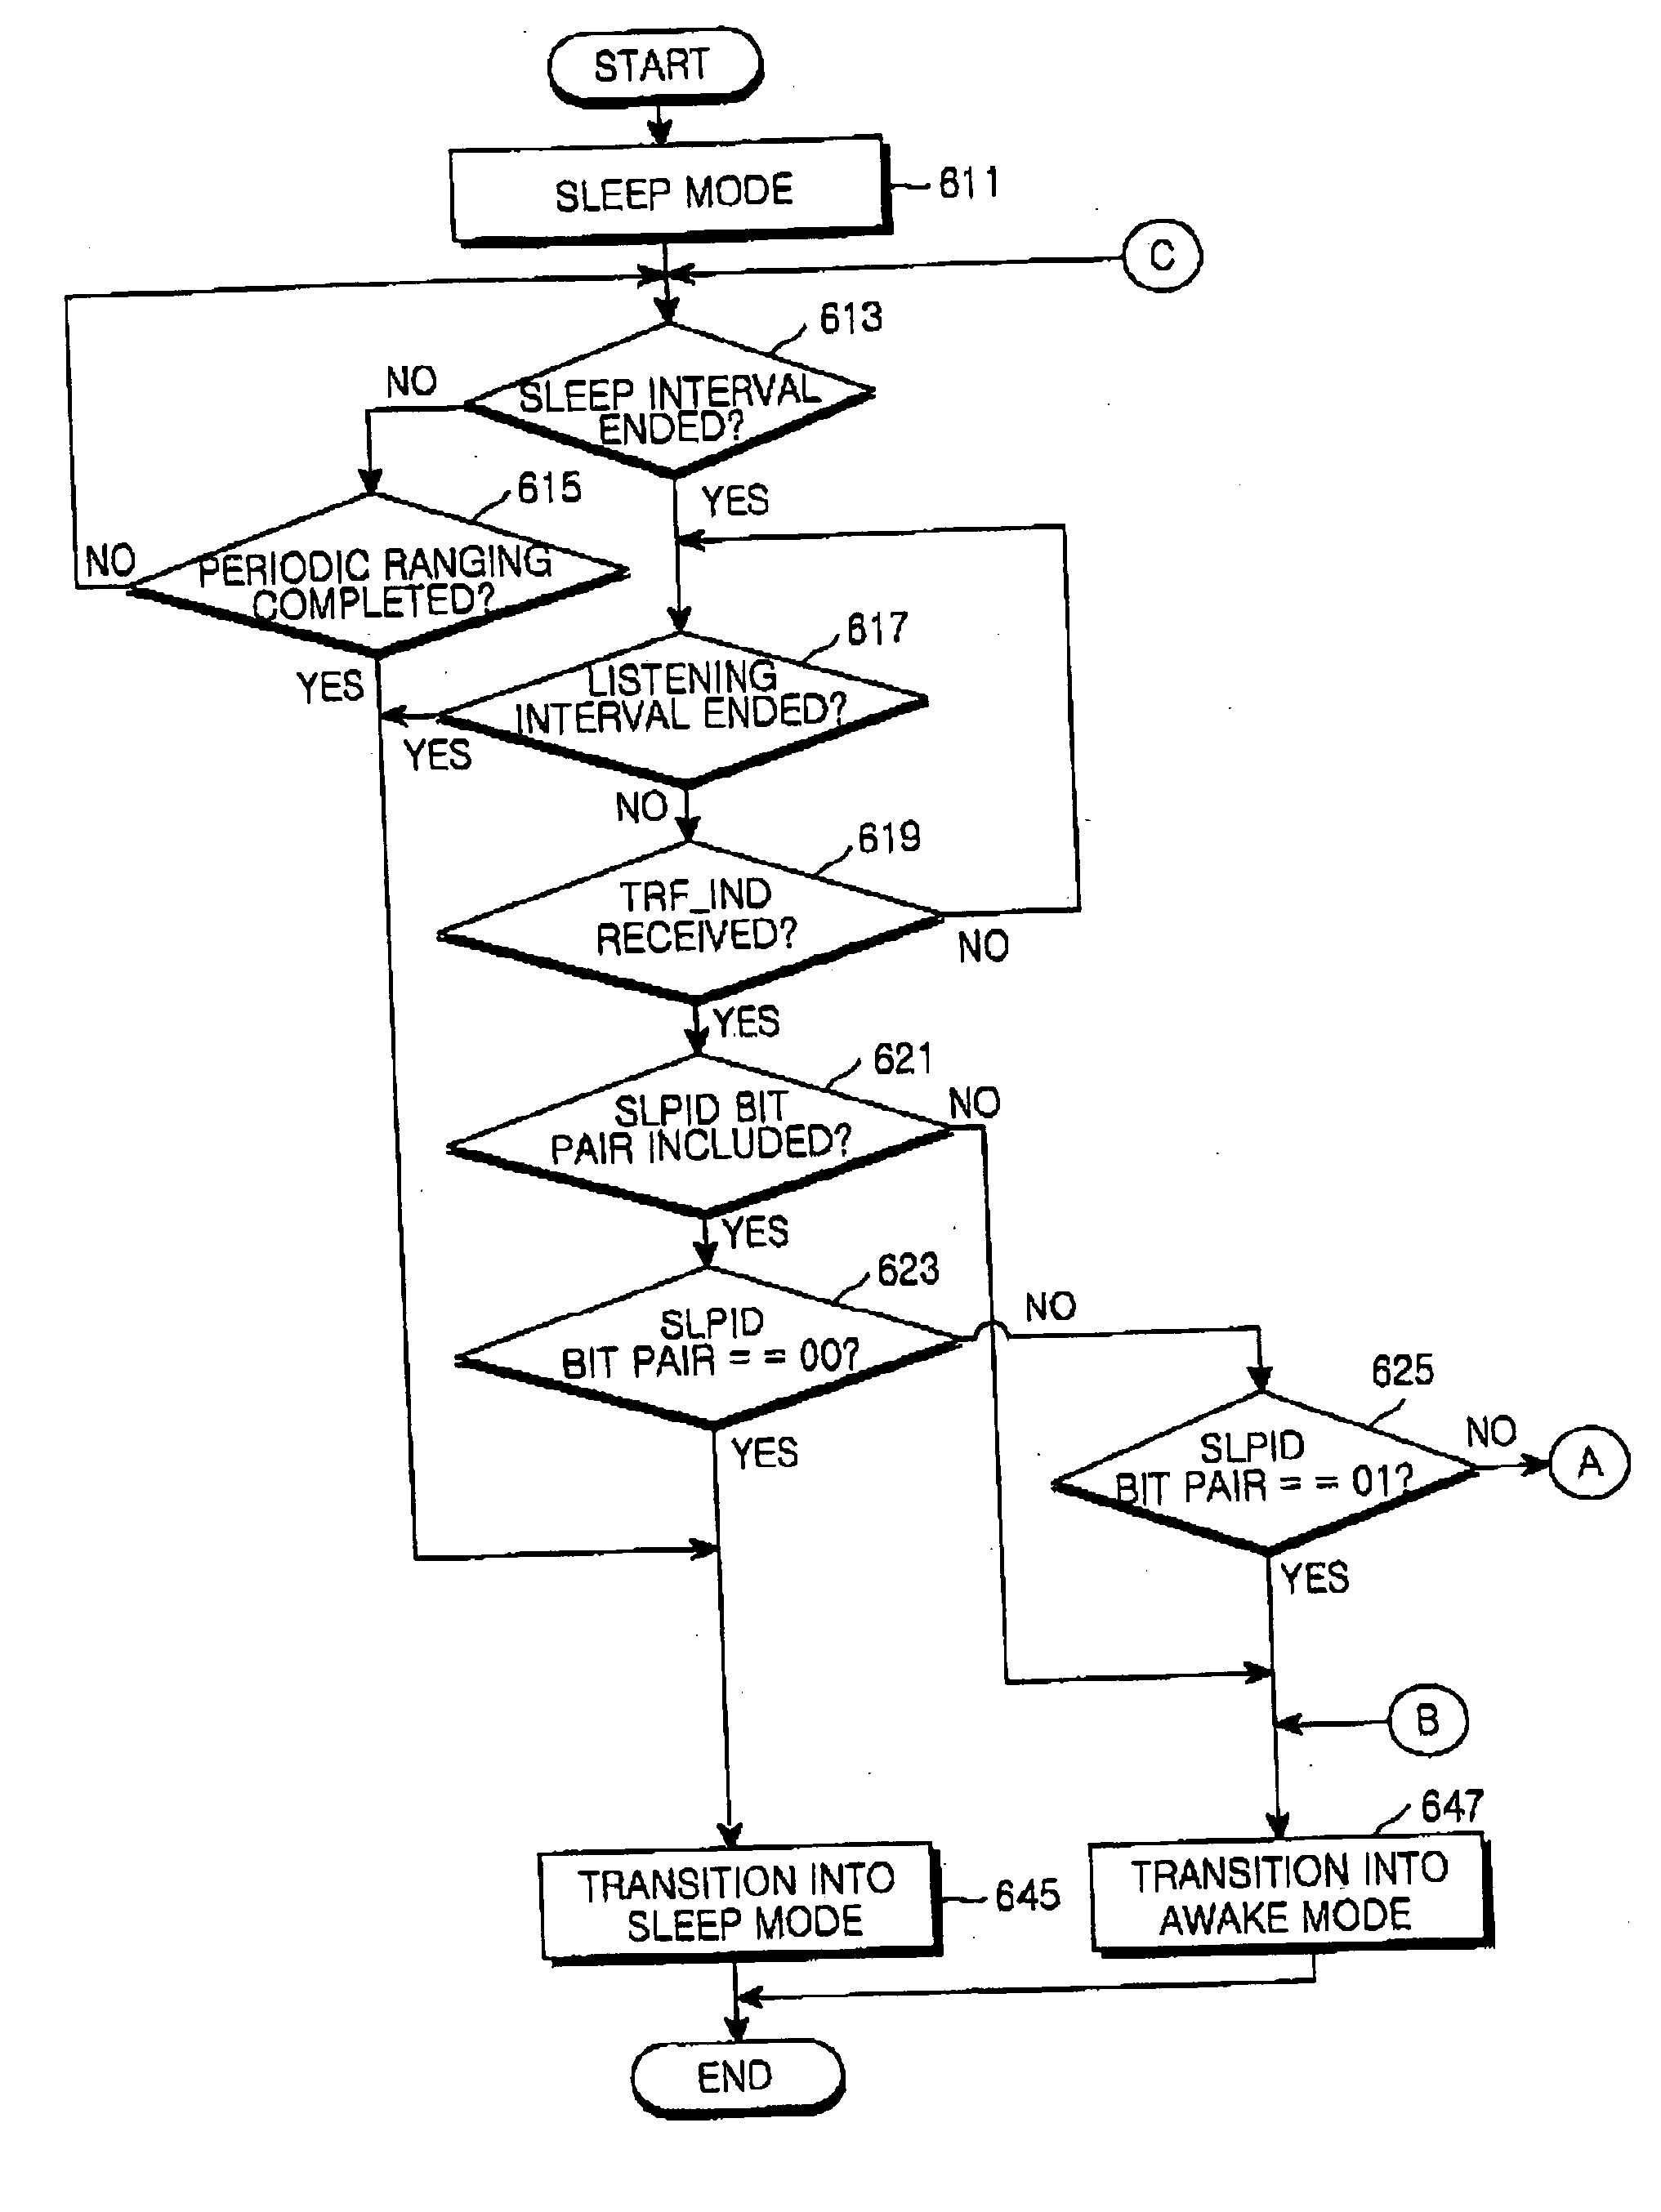 System and method for periodic ranging in sleep mode in broadband wireless access communication system